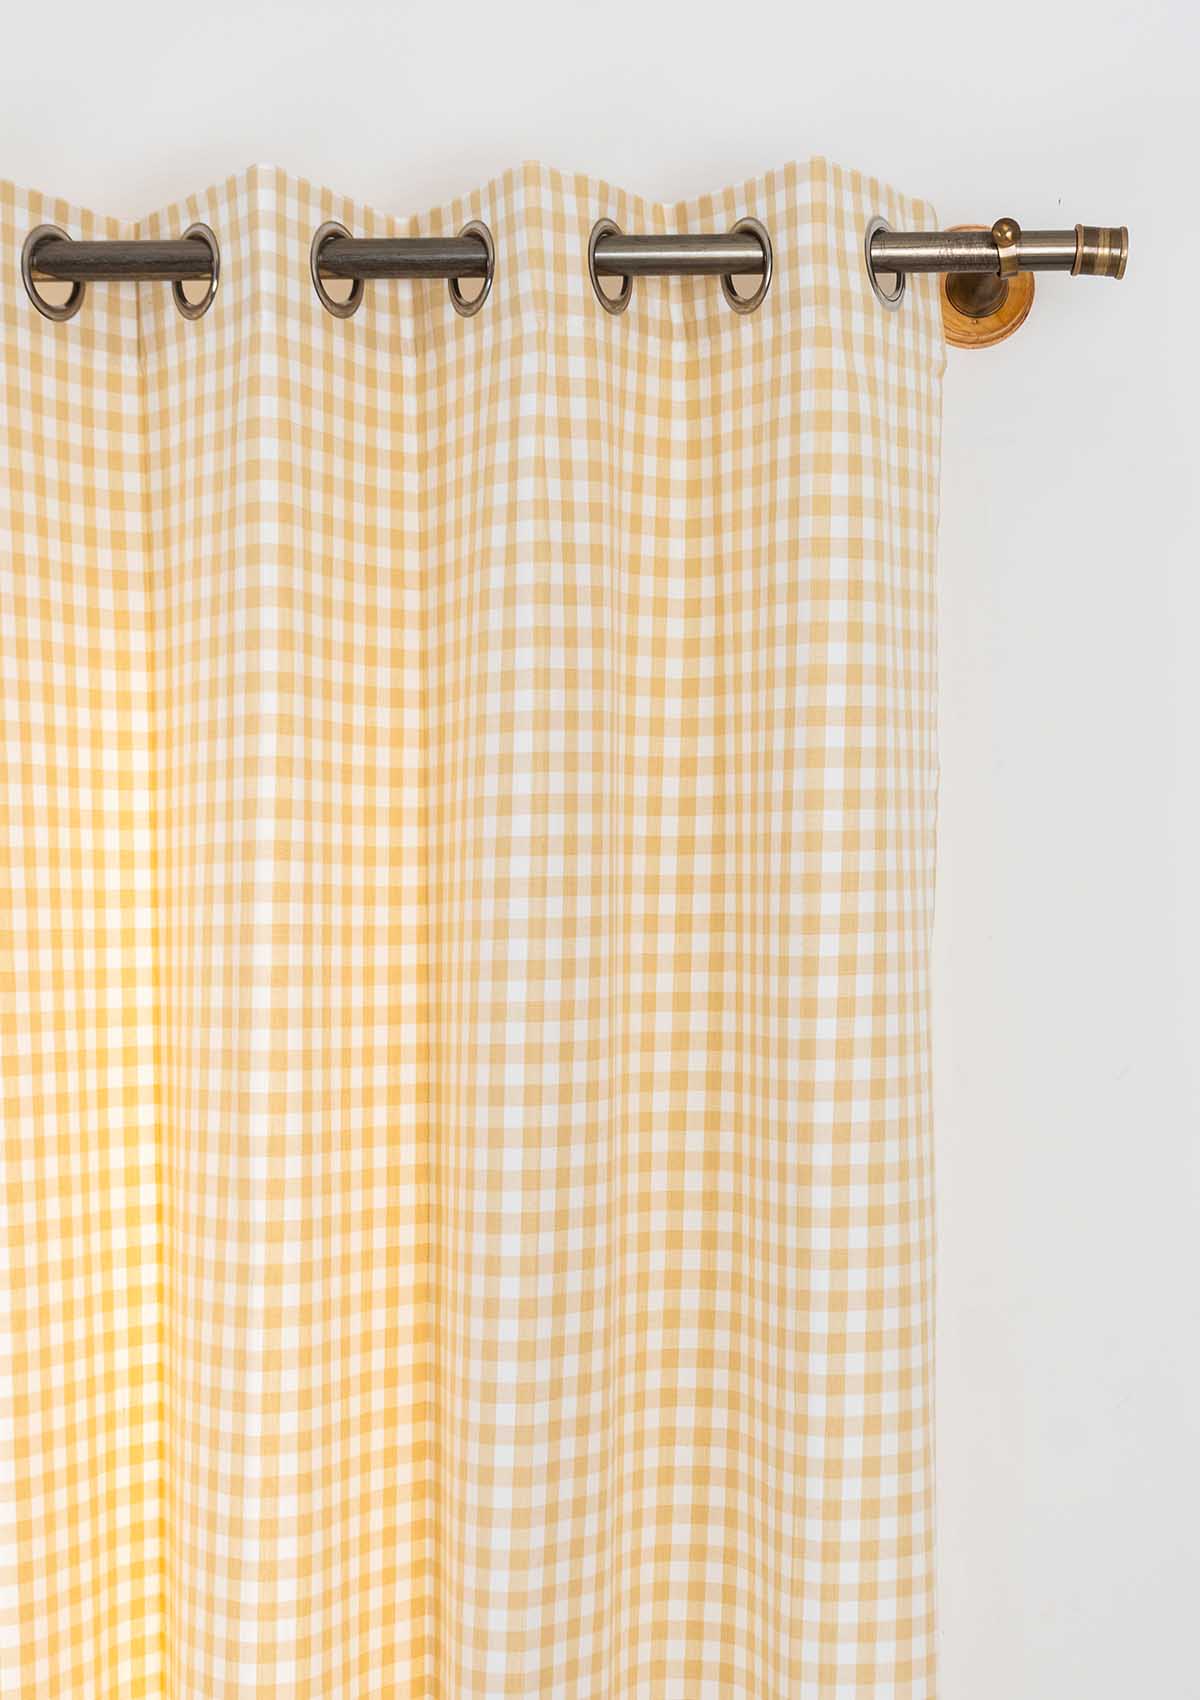 Gingham Woven Cotton Curtain - Ivory